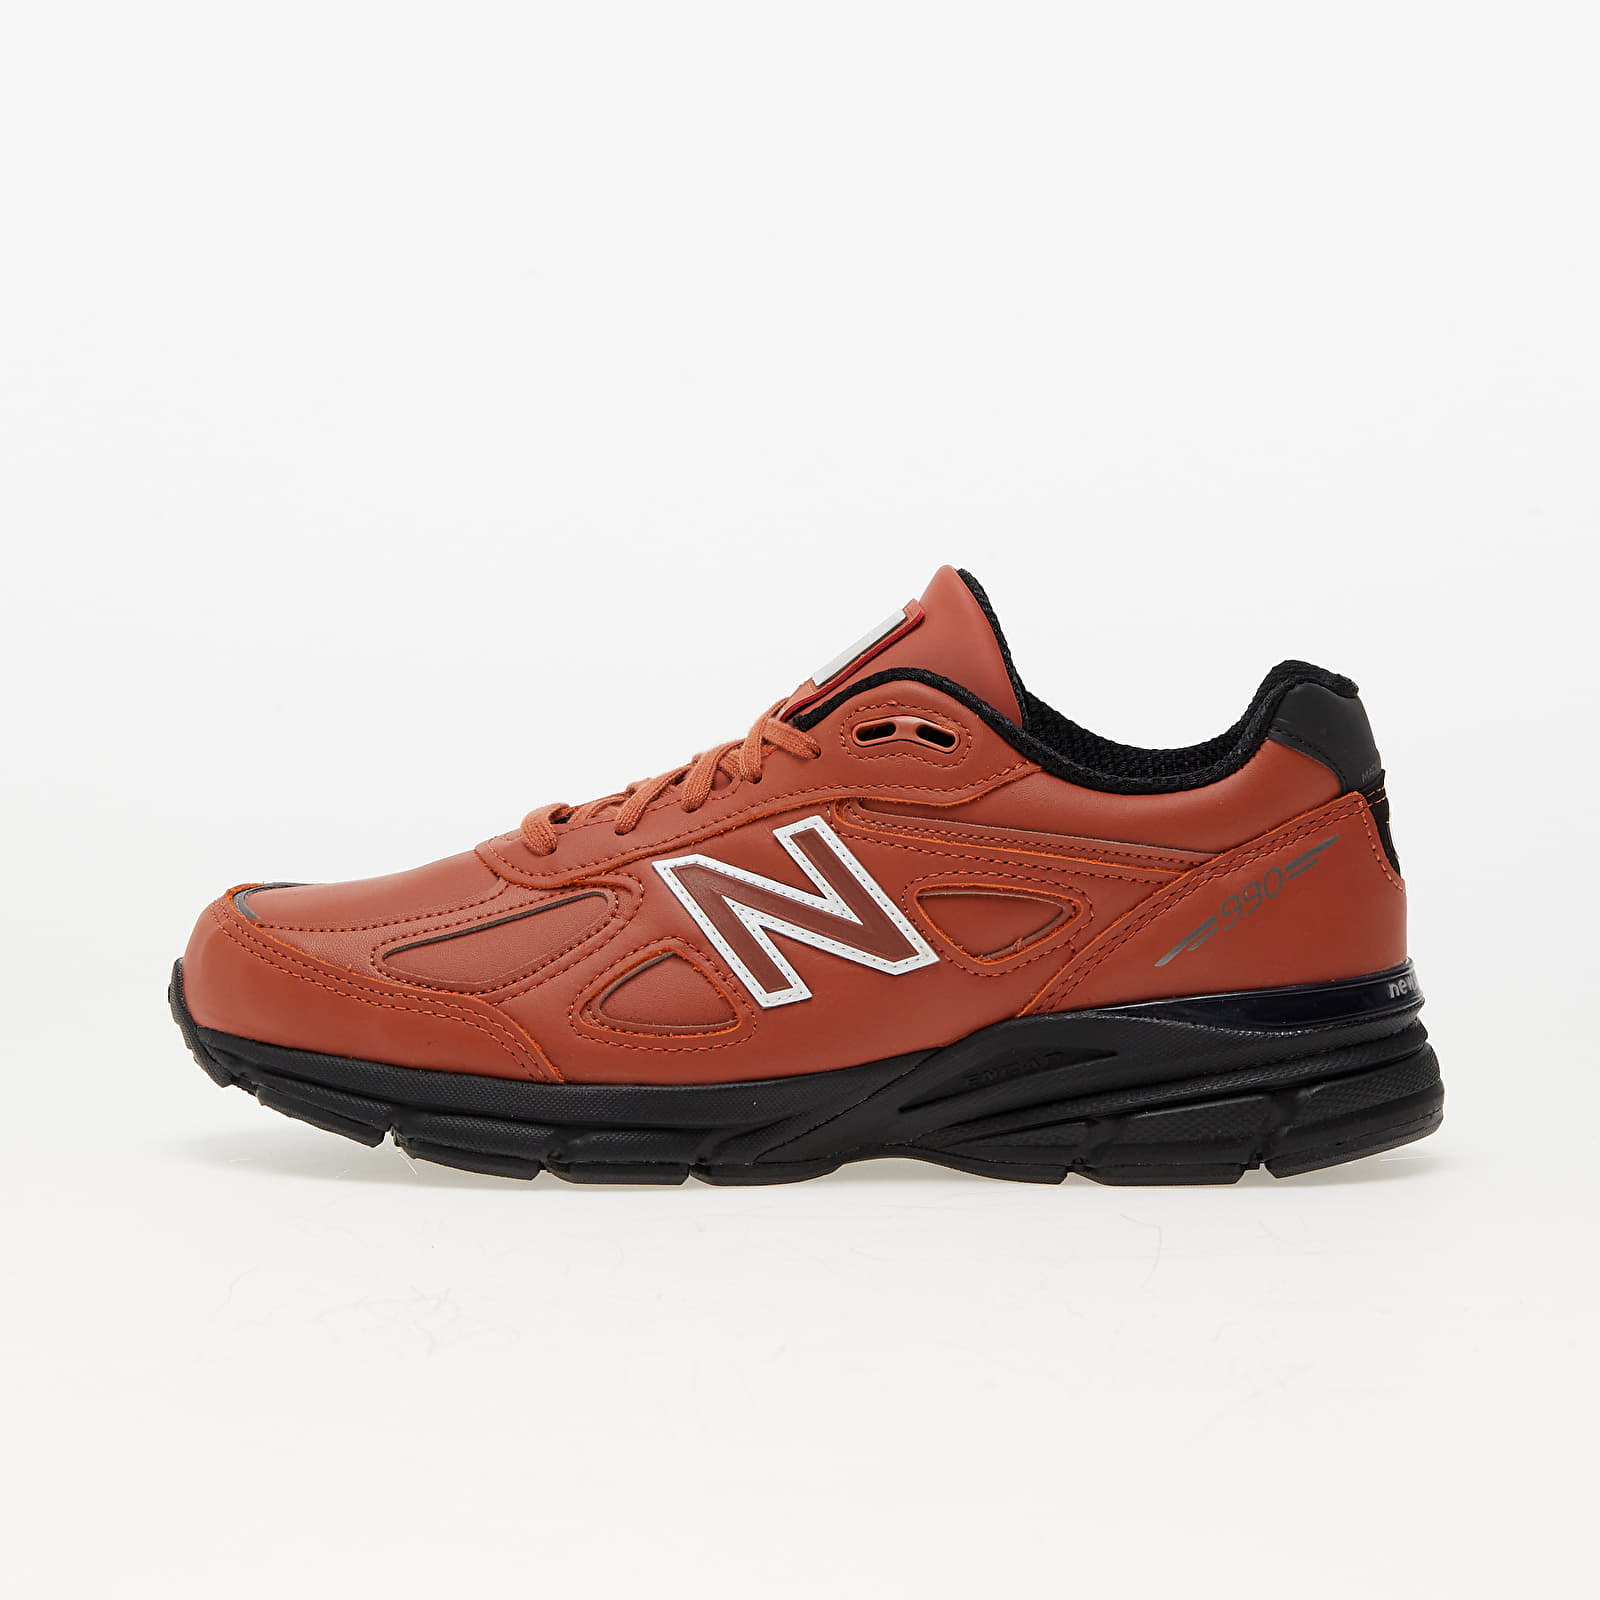 Baskets et chaussures pour hommes New Balance x Teddy Santis 990 V4 Made in USA Mahogany/ Black